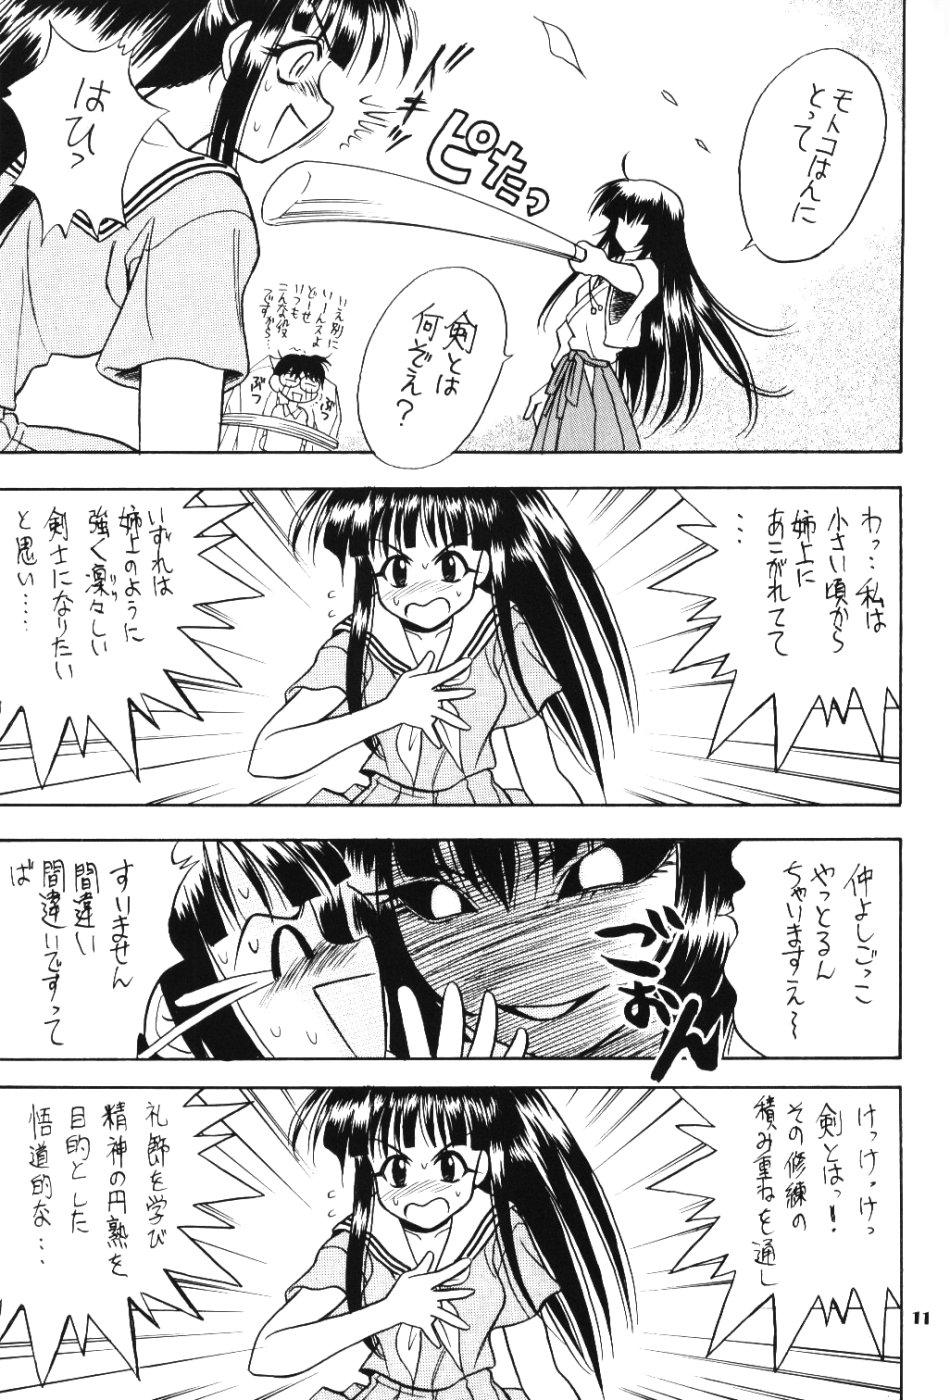 Sucks Lovely 3 - Love hina Large - Page 10